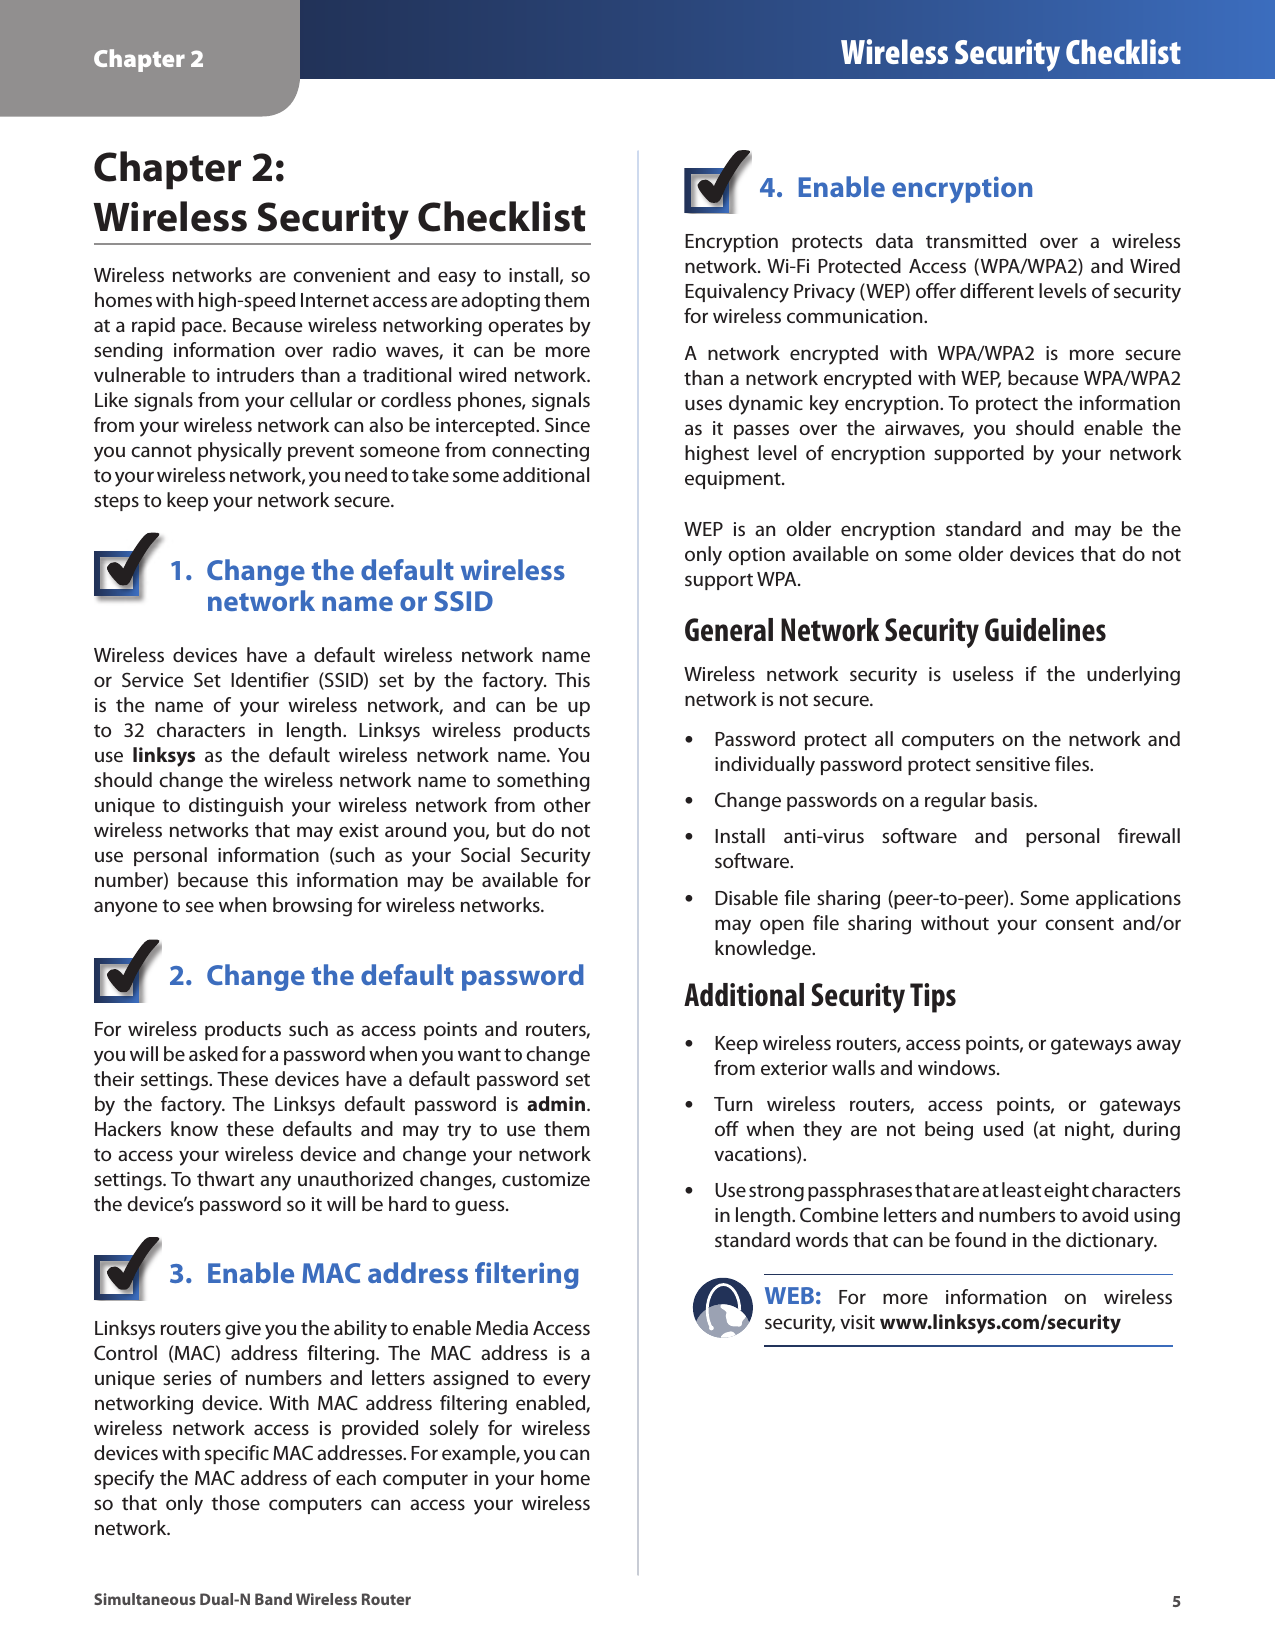 Chapter 2 Wireless Security Checklist5Simultaneous Dual-N Band Wireless RouterChapter 2:  Wireless Security ChecklistWireless  networks are convenient and  easy to install, so homes with high-speed Internet access are adopting them at a rapid pace. Because wireless networking operates by sending  information  over  radio  waves,  it  can  be  more vulnerable to intruders than a traditional wired network. Like signals from your cellular or cordless phones, signals from your wireless network can also be intercepted. Since you cannot physically prevent someone from connecting to your wireless network, you need to take some additional steps to keep your network secure. 1.  Change the default wireless    network name or SSIDWireless  devices  have  a  default  wireless  network  name or  Service  Set  Identifier  (SSID)  set  by  the  factory.  This is  the  name  of  your  wireless  network,  and  can  be  up to  32  characters  in  length.  Linksys  wireless  products use  linksys  as  the  default  wireless  network  name.  You should change the wireless network name to something unique  to distinguish  your wireless  network from  other wireless networks that may exist around you, but do not use  personal  information  (such  as  your  Social  Security number)  because  this  information  may  be  available  for anyone to see when browsing for wireless networks. 2.  Change the default passwordFor wireless products such as access points and routers, you will be asked for a password when you want to change their settings. These devices have a default password set by  the  factory.  The  Linksys  default  password  is  admin. Hackers  know  these  defaults  and  may  try  to  use  them to access your wireless device and change your network settings. To thwart any unauthorized changes, customize the device’s password so it will be hard to guess.3.  Enable MAC address filteringLinksys routers give you the ability to enable Media Access Control  (MAC)  address  filtering.  The  MAC  address  is  a unique  series  of  numbers  and  letters  assigned to  every networking  device. With  MAC  address filtering  enabled, wireless  network  access  is  provided  solely  for  wireless devices with specific MAC addresses. For example, you can specify the MAC address of each computer in your home so  that  only  those  computers  can  access  your  wireless network. 4.  Enable encryptionEncryption  protects  data  transmitted  over  a  wireless network. Wi-Fi Protected  Access (WPA/WPA2) and Wired Equivalency Privacy (WEP) offer different levels of security for wireless communication.A  network  encrypted  with  WPA/WPA2  is  more  secure than a network encrypted with WEP, because WPA/WPA2 uses dynamic key encryption. To protect the information as  it  passes  over  the  airwaves,  you  should  enable  the highest  level  of  encryption  supported  by  your  network equipment. WEP  is  an  older  encryption  standard  and  may  be  the only option available on some older devices that do not support WPA.General Network Security GuidelinesWireless  network  security  is  useless  if  the  underlying network is not secure. Password protect  all computers on  the network  and  •individually password protect sensitive files.Change passwords on a regular basis. •Install  anti-virus  software  and  personal  firewall  •software.Disable file sharing (peer-to-peer). Some applications  •may  open  file  sharing  without  your  consent  and/or knowledge.Additional Security TipsKeep wireless routers, access points, or gateways away  •from exterior walls and windows.Turn  wireless  routers,  access  points,  or  gateways  •off  when  they  are  not  being  used  (at  night,  during vacations).Use strong passphrases that are at least eight characters  •in length. Combine letters and numbers to avoid using standard words that can be found in the dictionary. WEB:  For  more  information  on  wireless security, visit www.linksys.com/security